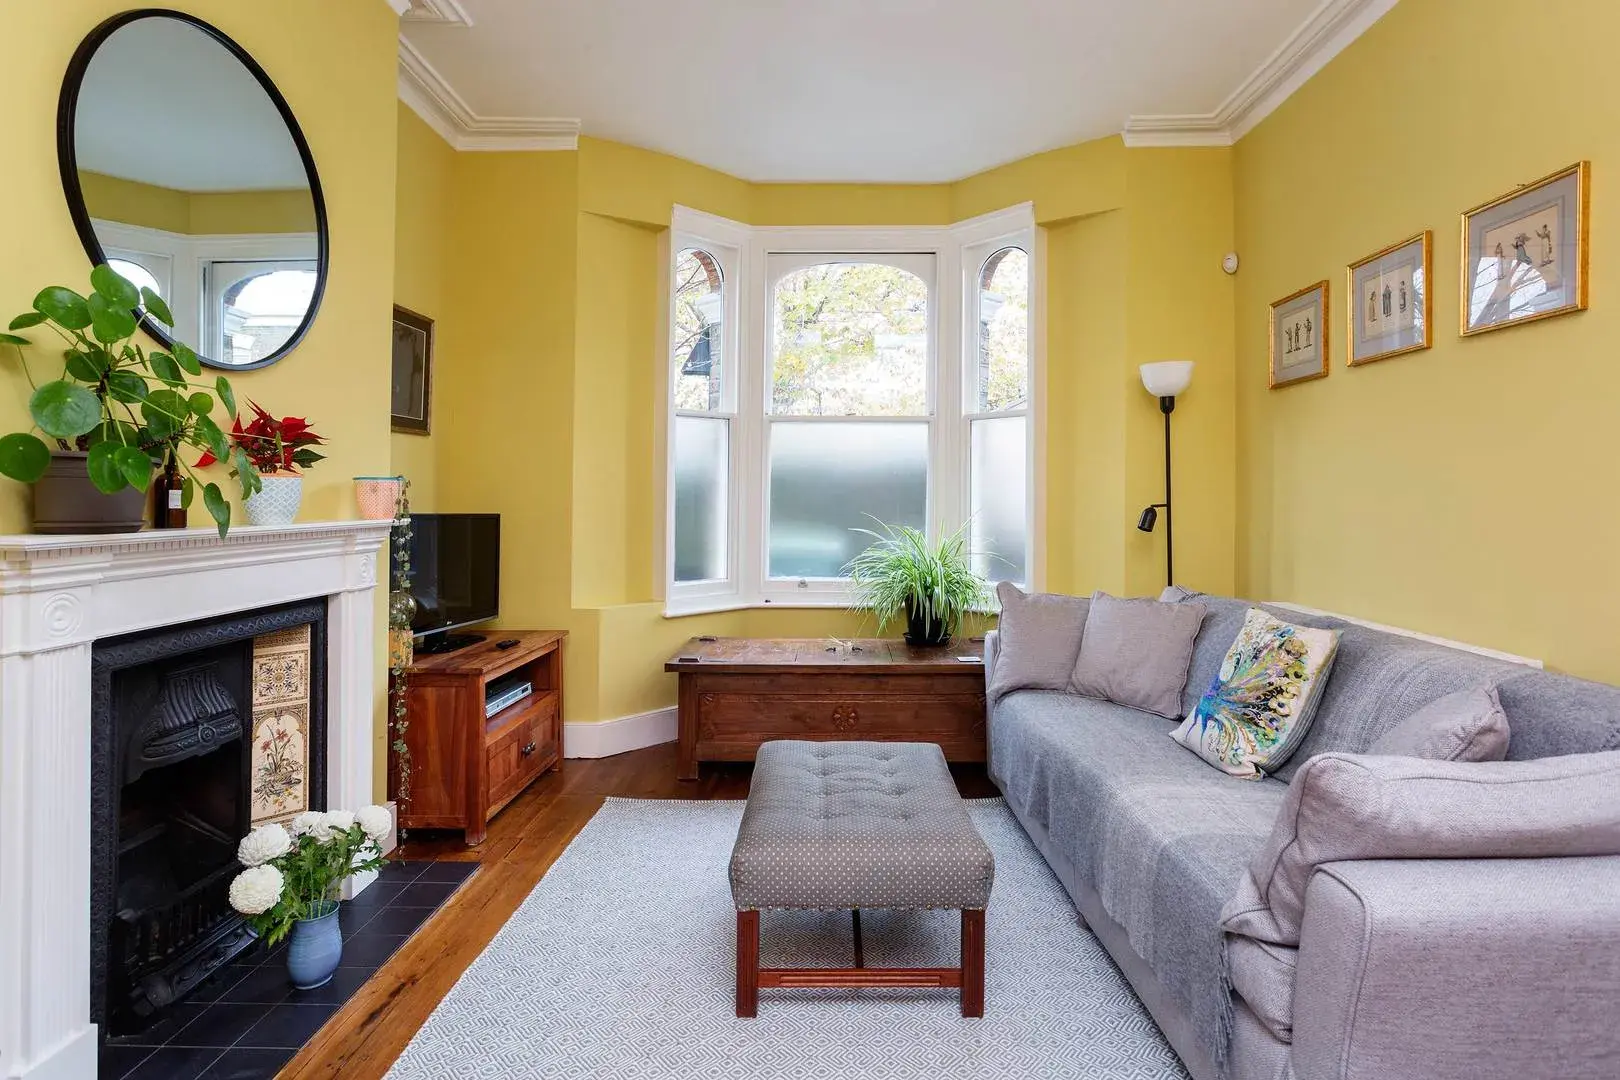 Pulross Road, holiday home in Clapham, London